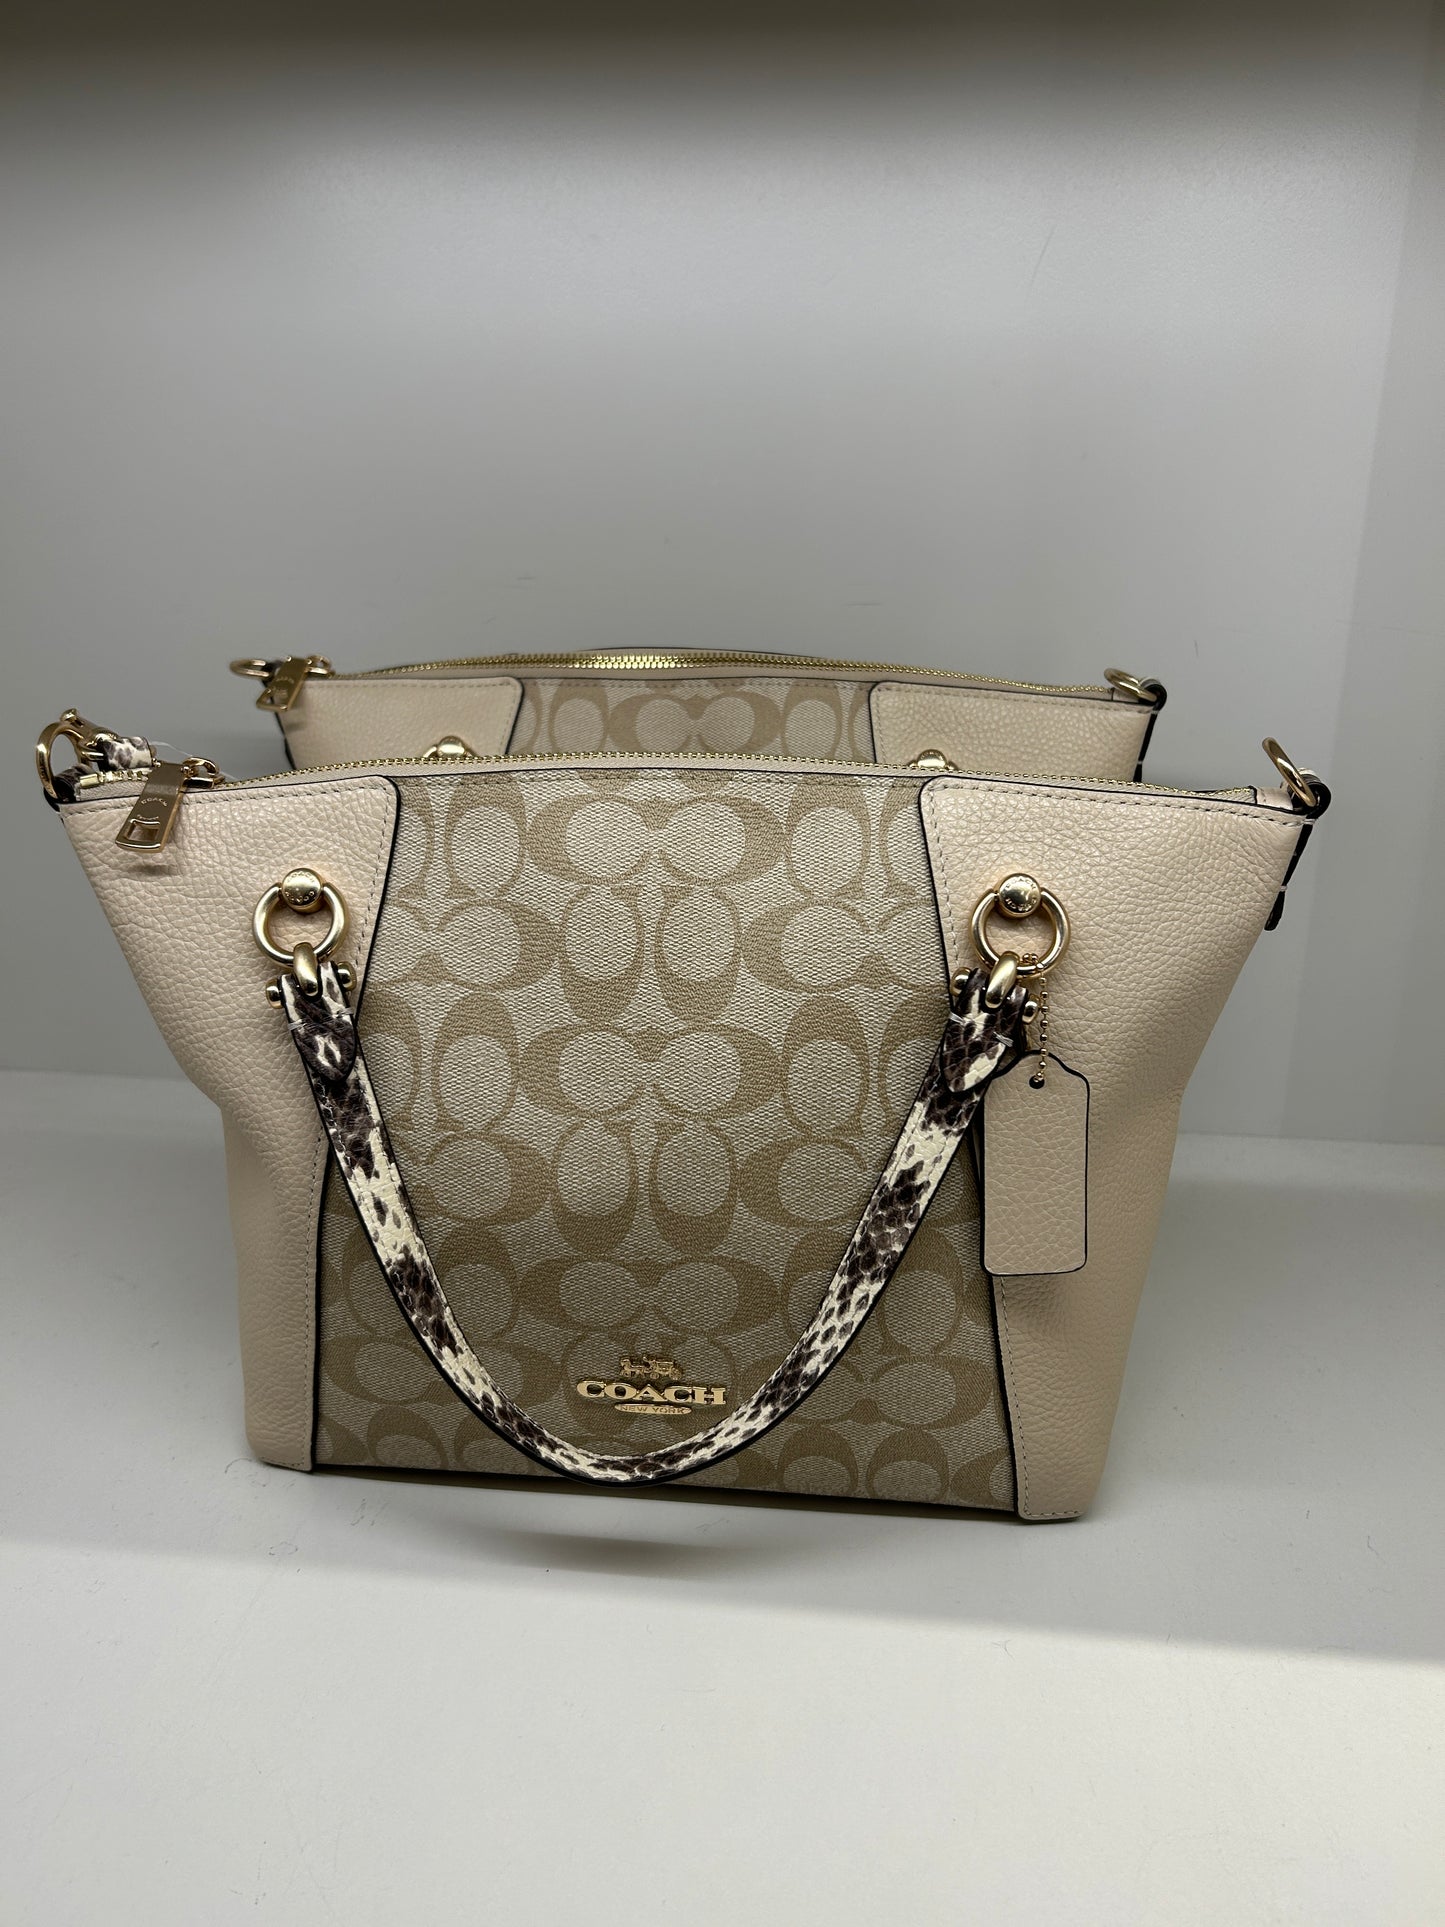 Coach Kacey Satchel In Colorblock Signature In Light Khaki Ivory (Pre-Order)